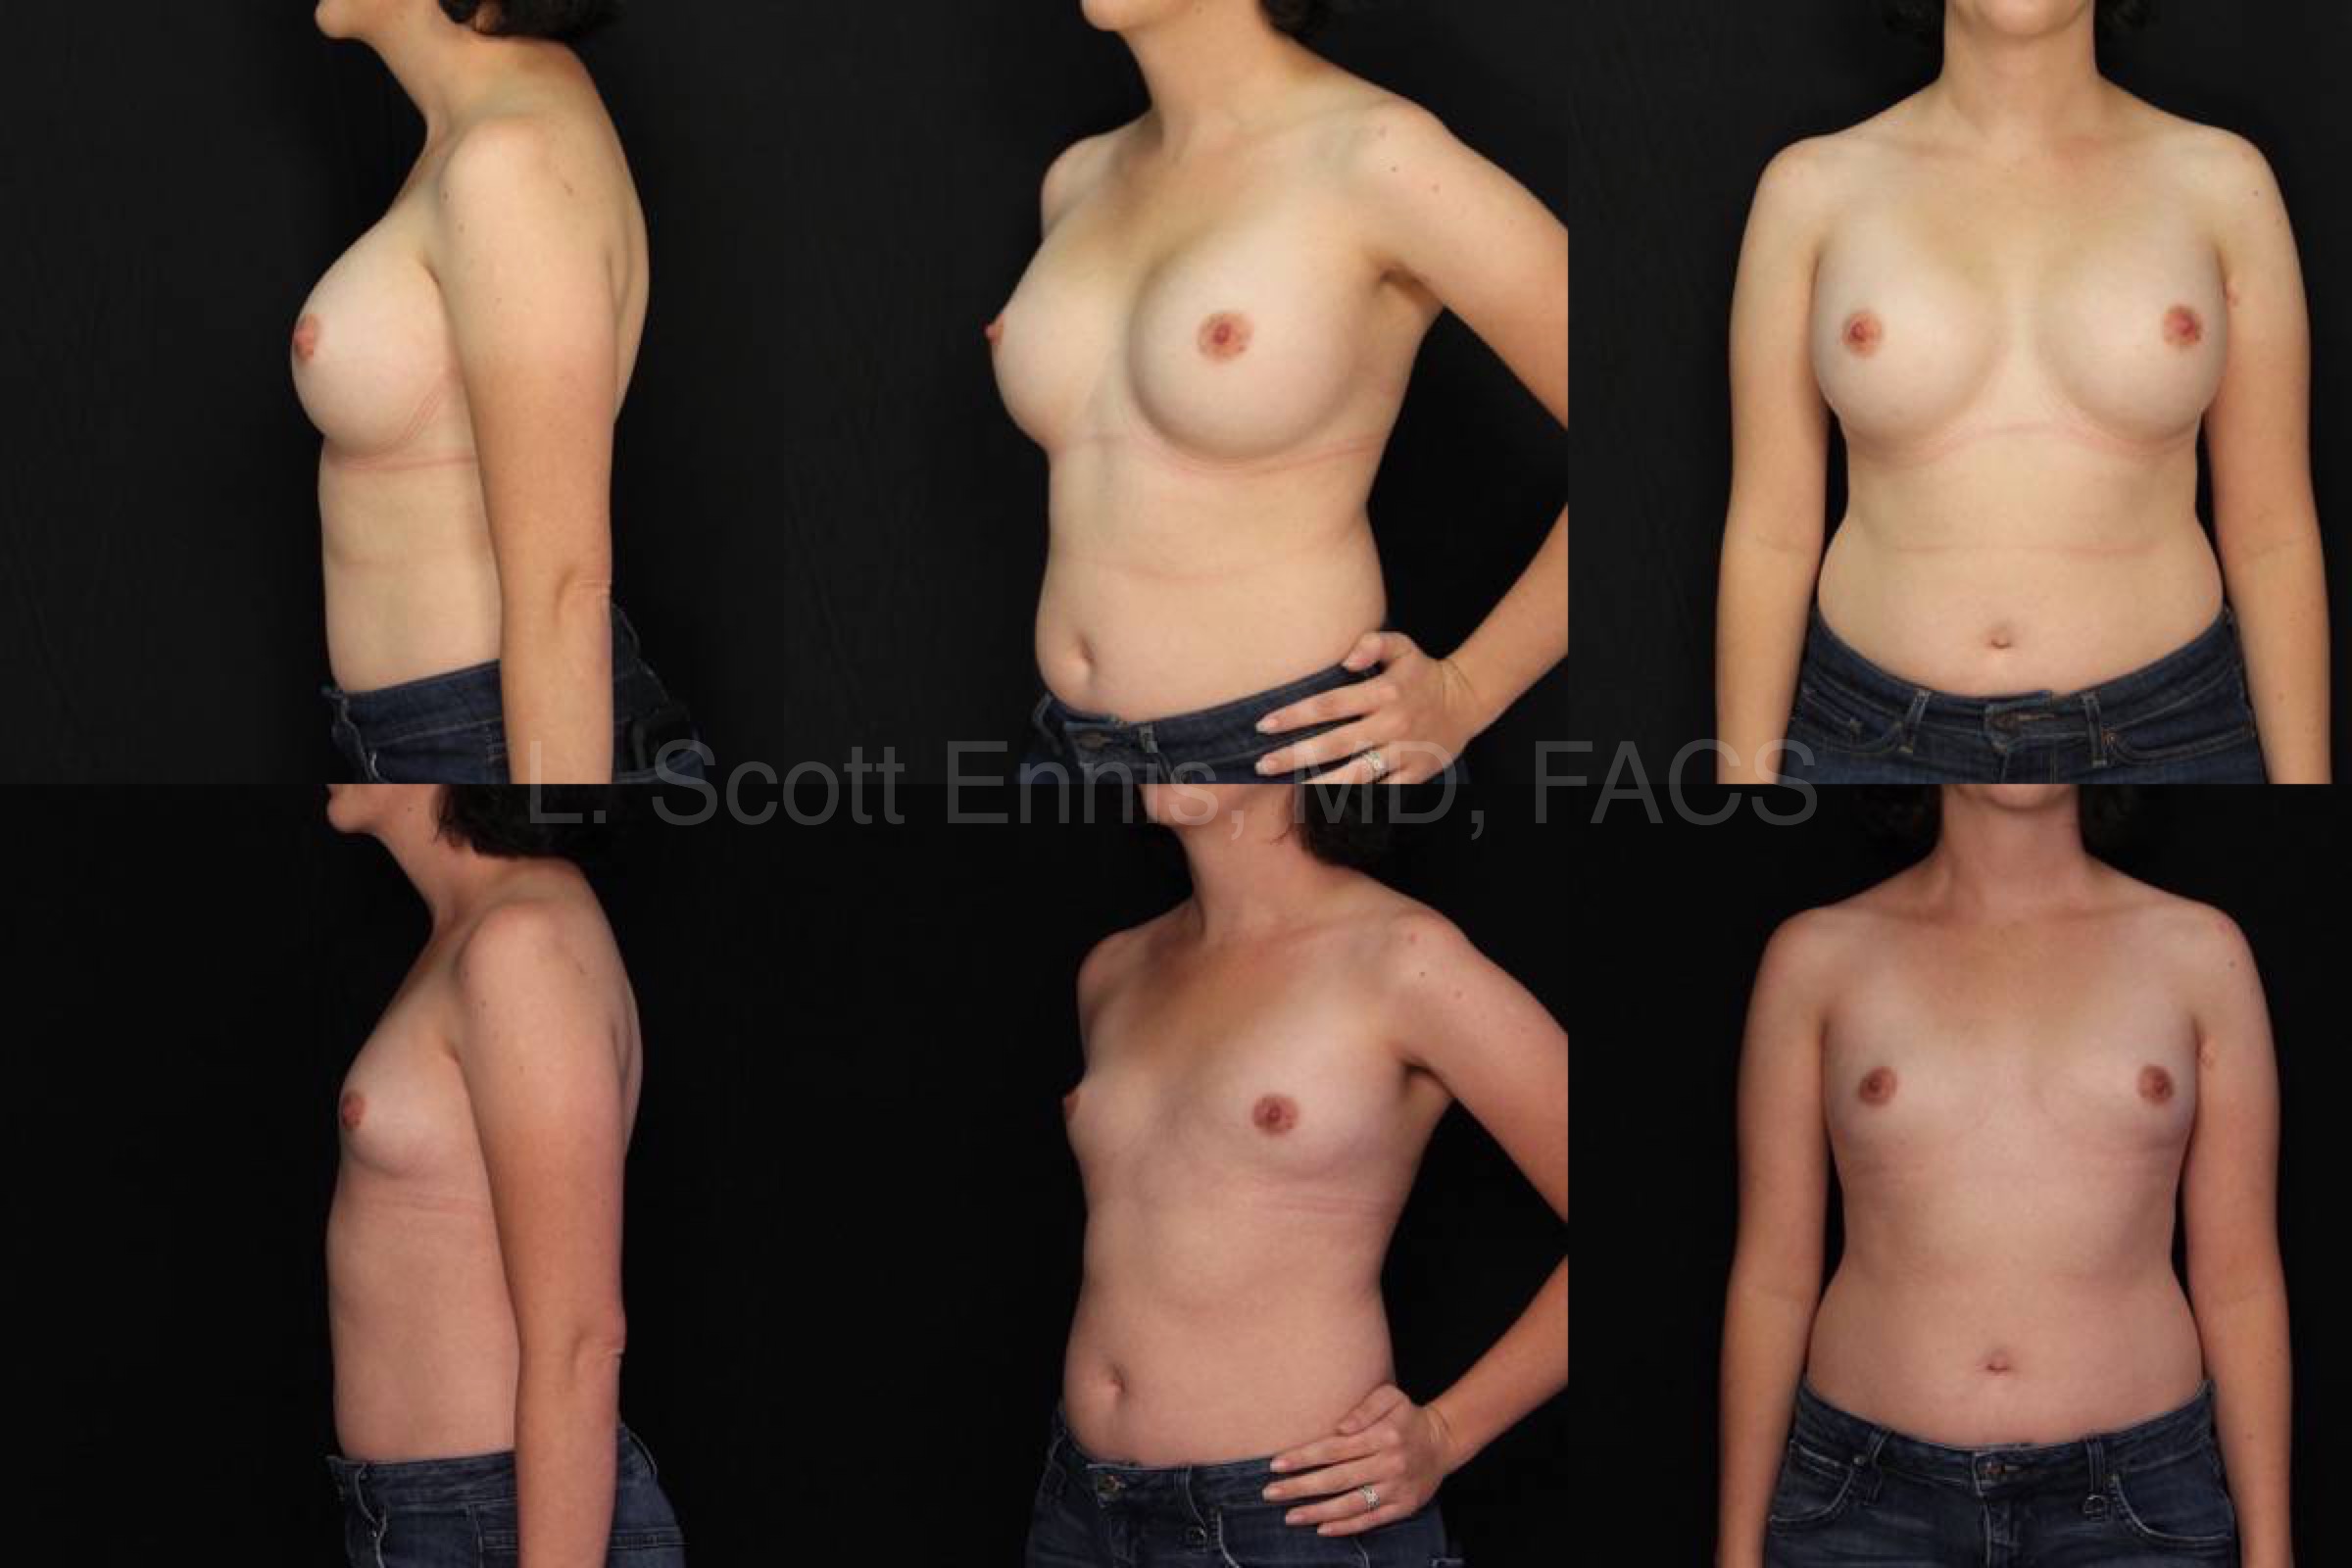 Breast Implant Removal without Replacement bilateral Before and After Ennis Plastic Surgery Palm Beach Boca Raton Destin Miami Fort Lauderdale